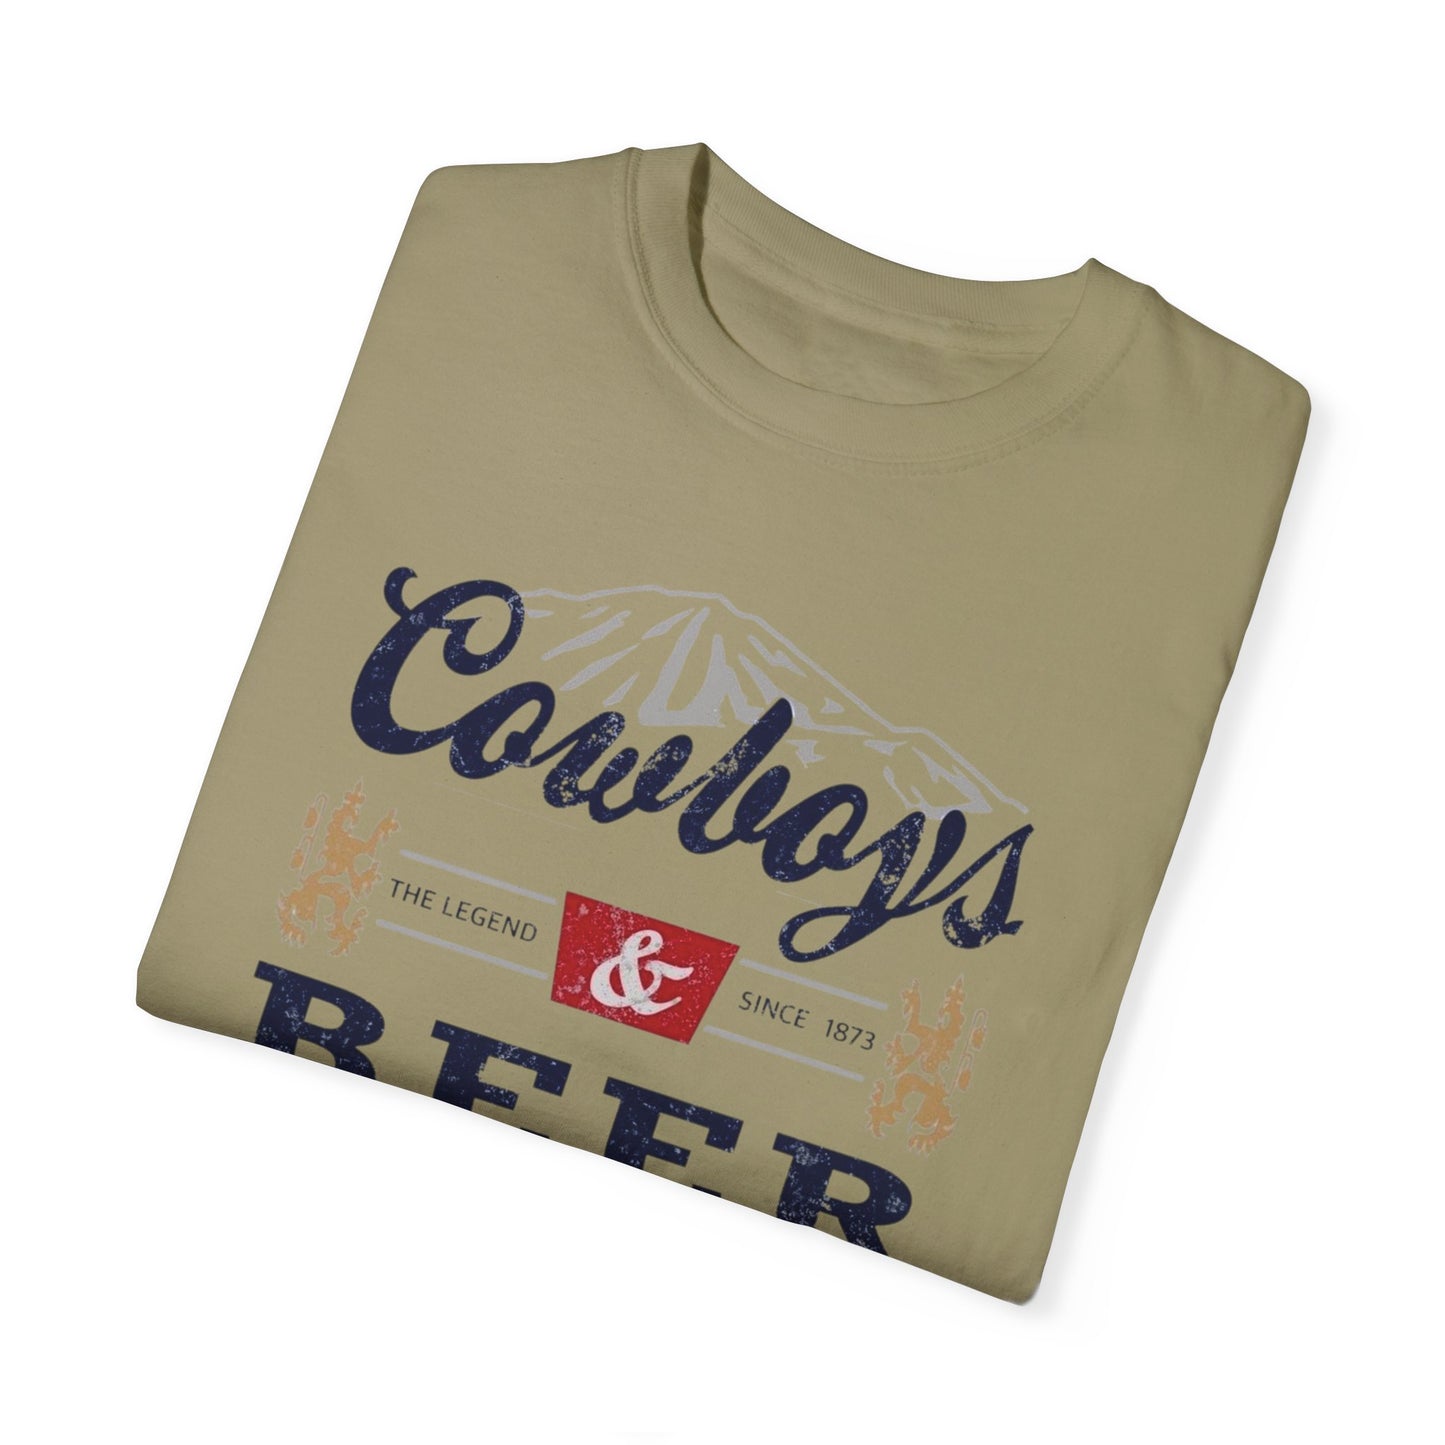 Comfort Colors® Cowboys and Beer, Trendy Tshirt. Oversized Tshirt, Coors, Cowboy, Cowgirl T-shirt, Country Rodeo Shirt, Beer Tee